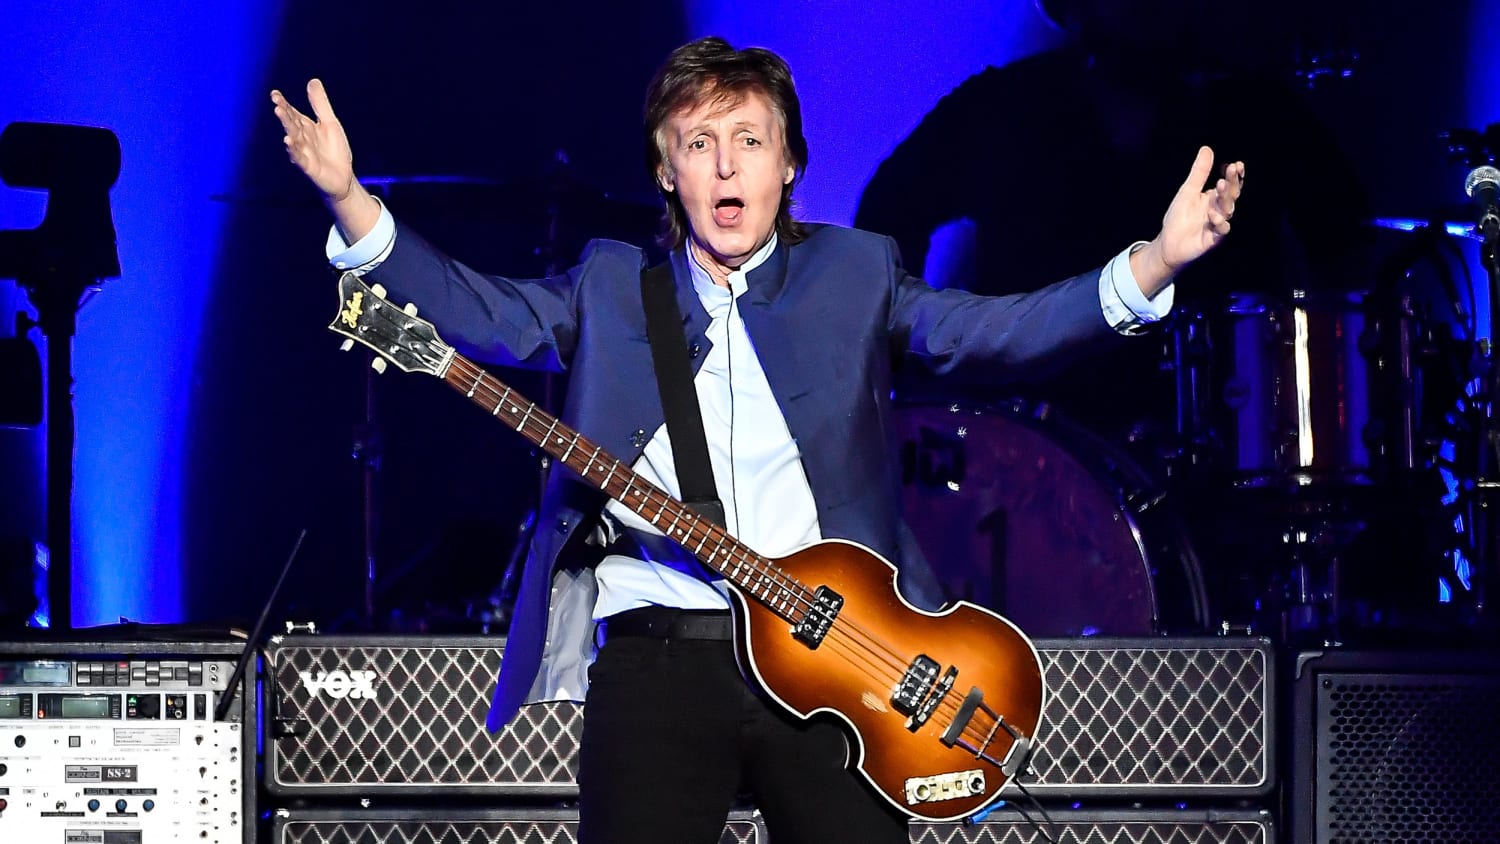 Paul McCartney plays 'A Hard Day's Night' — for the first time in